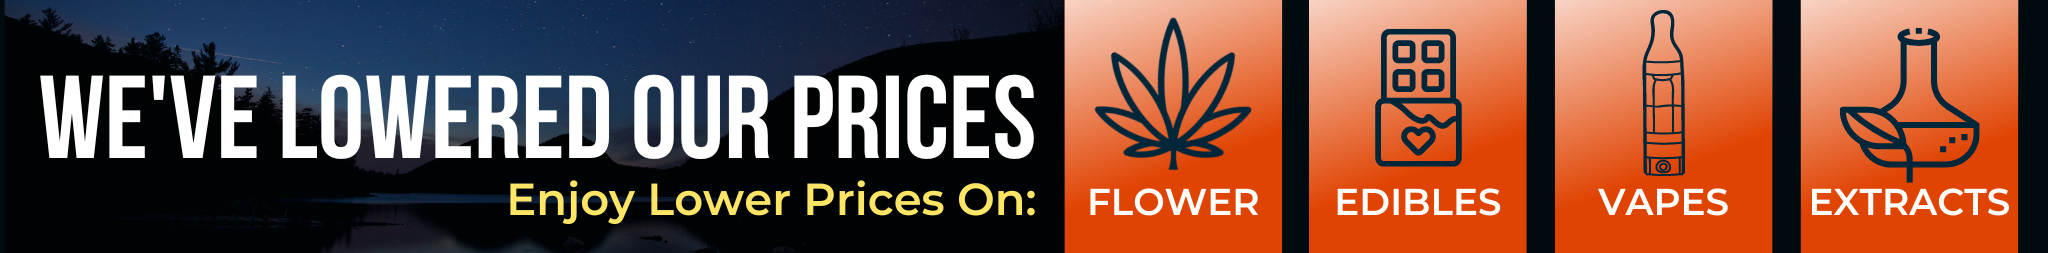 wellness-connection-new-low-prices-flower-vape-carts-edibles-concentrates-thc-infused